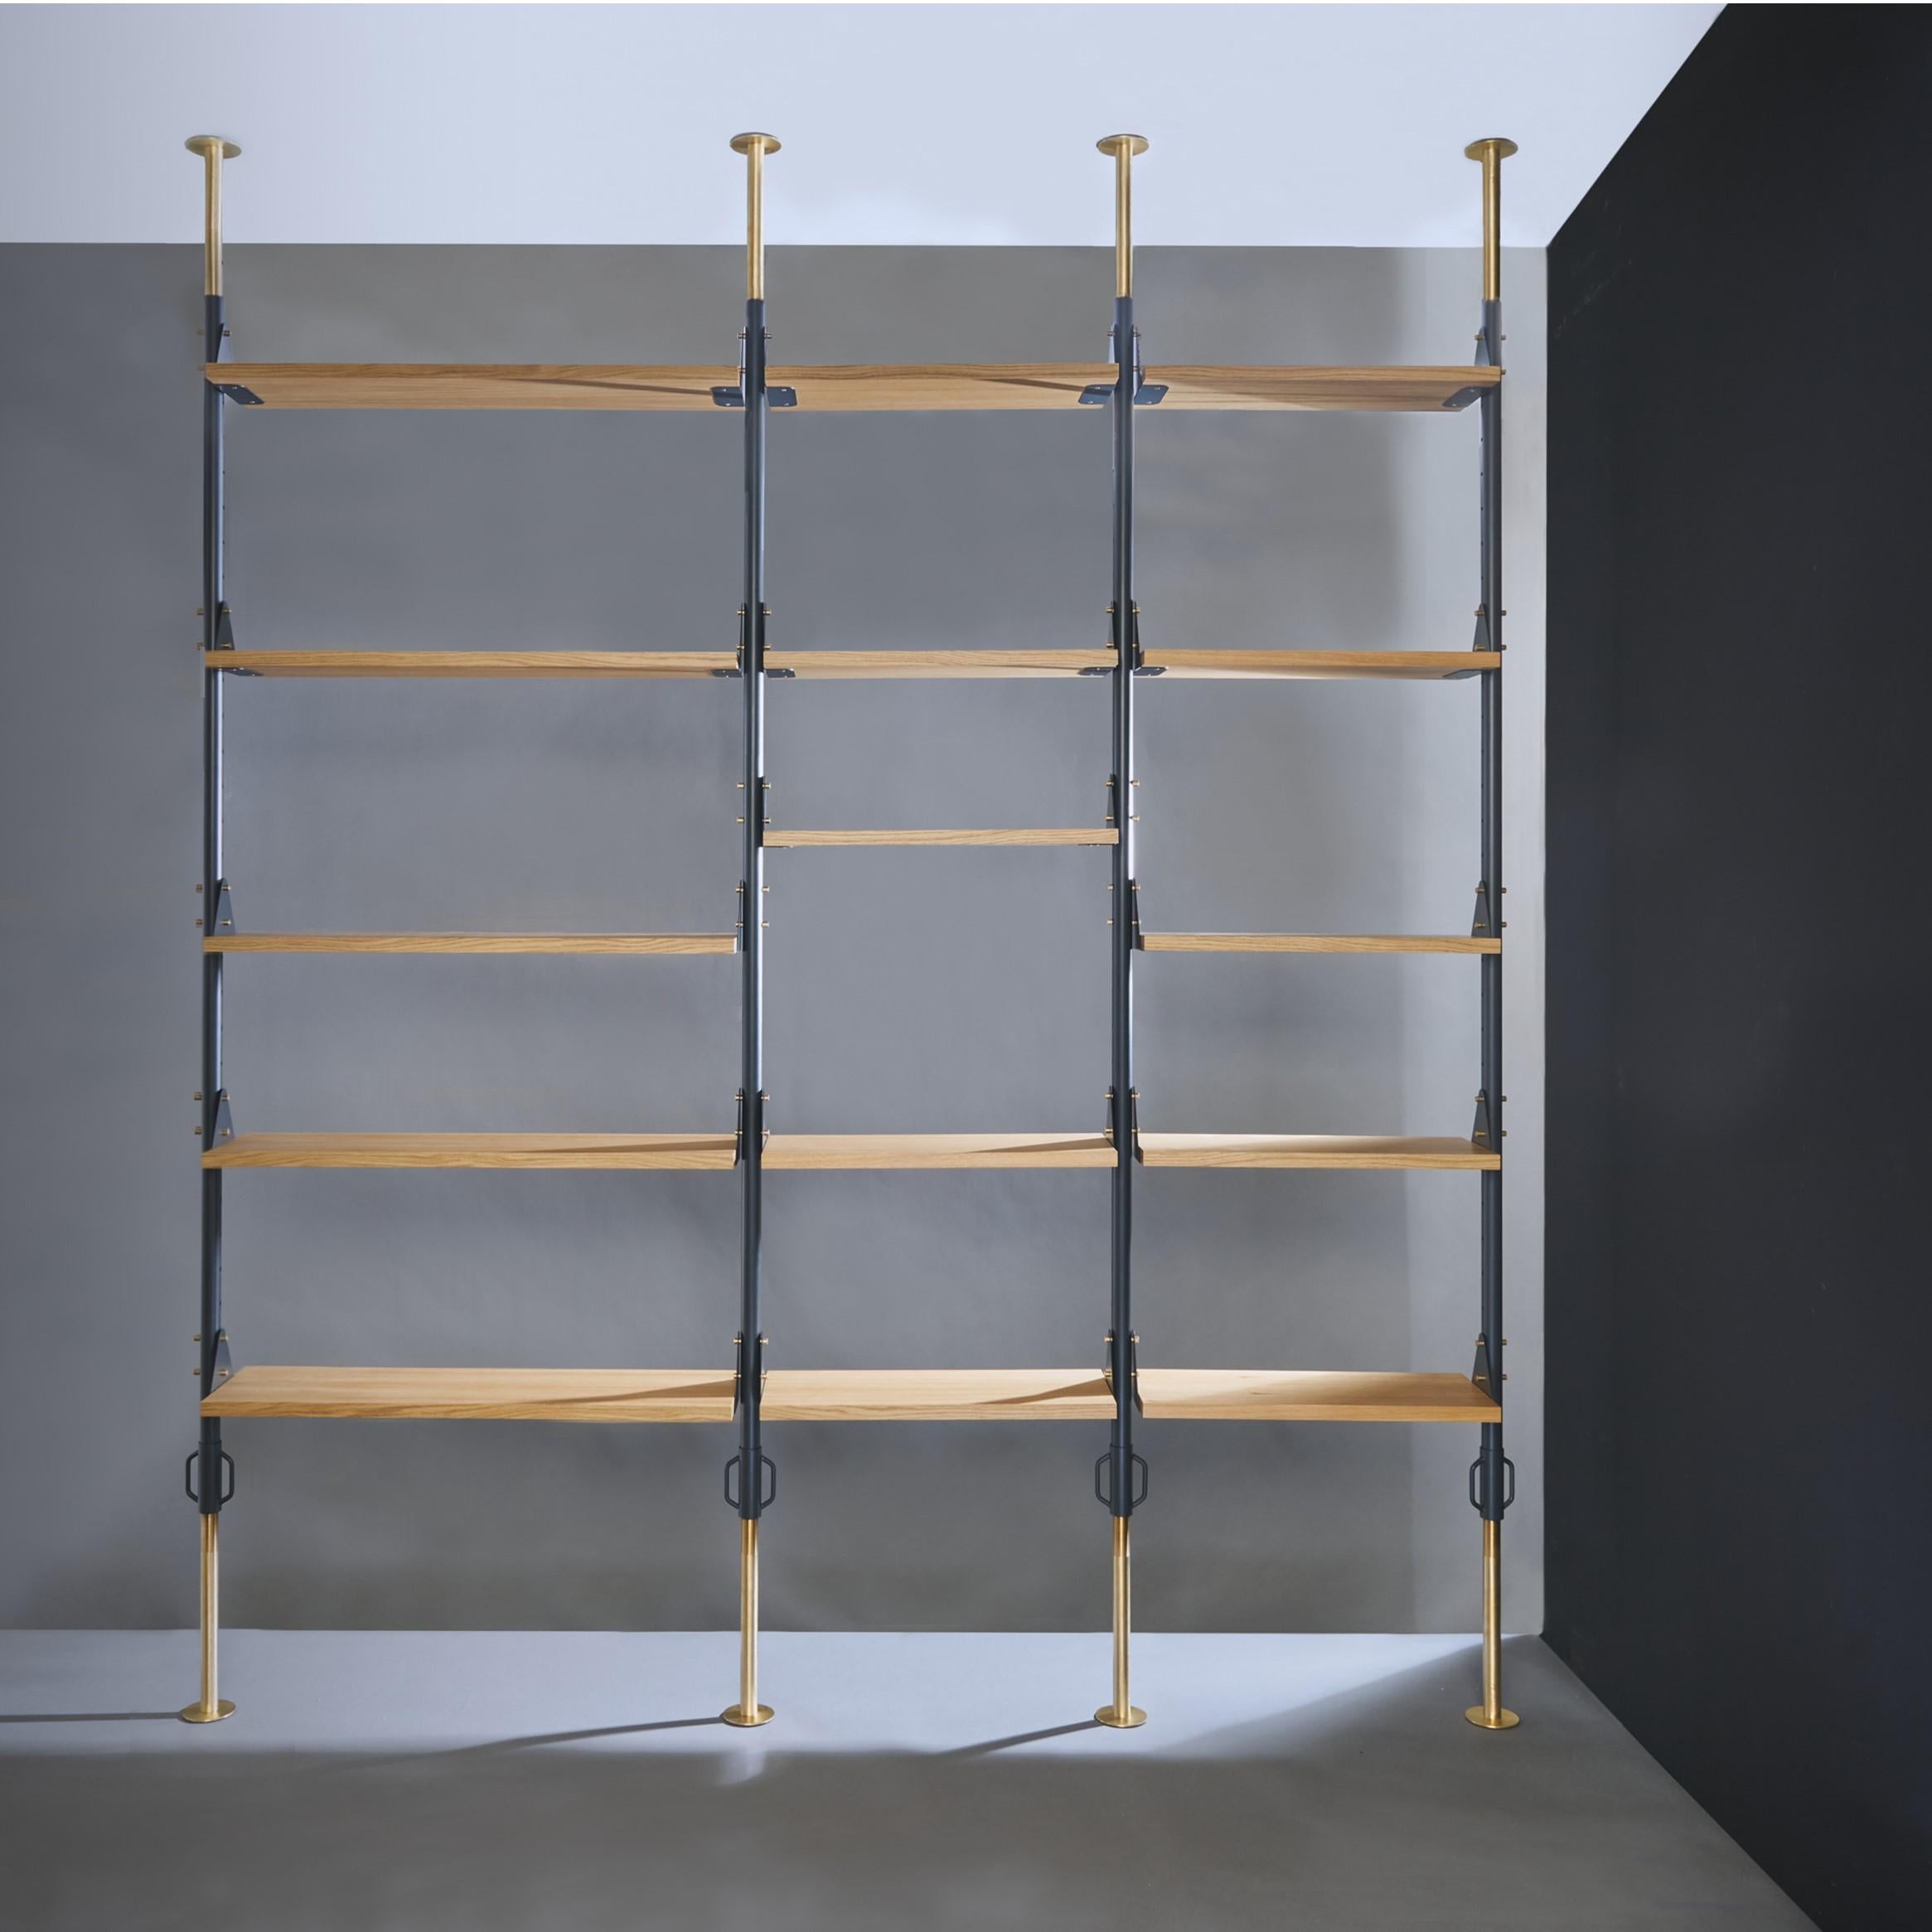 Sky-floor bookcase 'PUNTELLO MODULARE'
PUNTELLO MODULARE is a modular and adaptable sky-floor bookcase. Starting from our Prop, we have designed a modular system that allows you to add, remove and move the elements thanks to the new shelf brackets